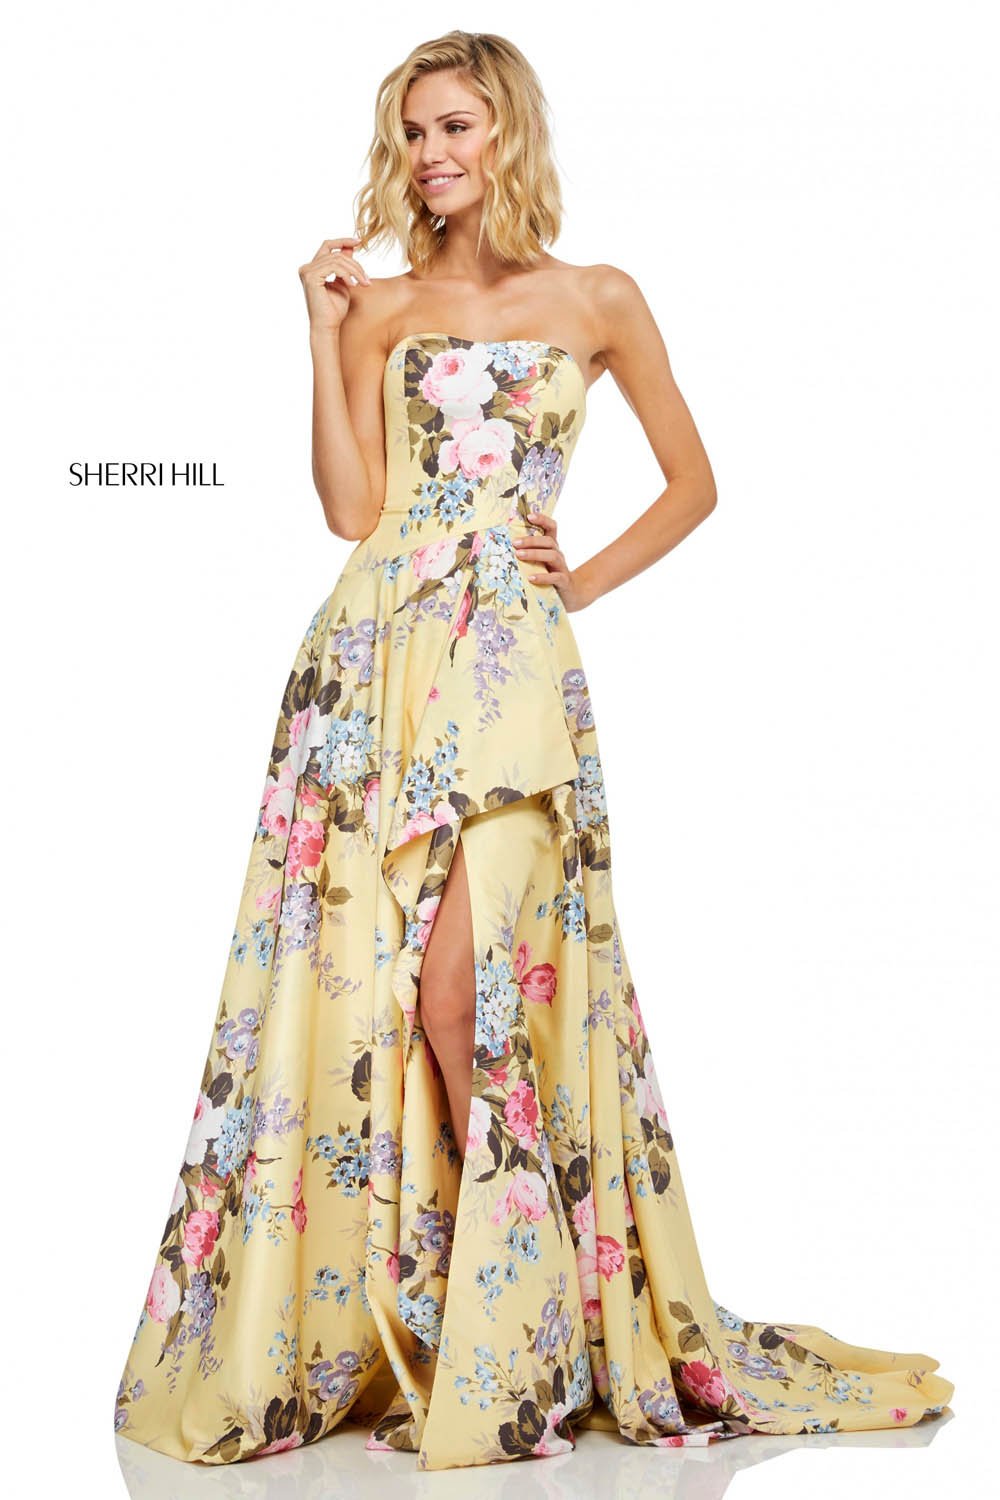 Sherri Hill 52531 dress images in these colors: Light Blue Print, Ivory Print, Yellow Print.